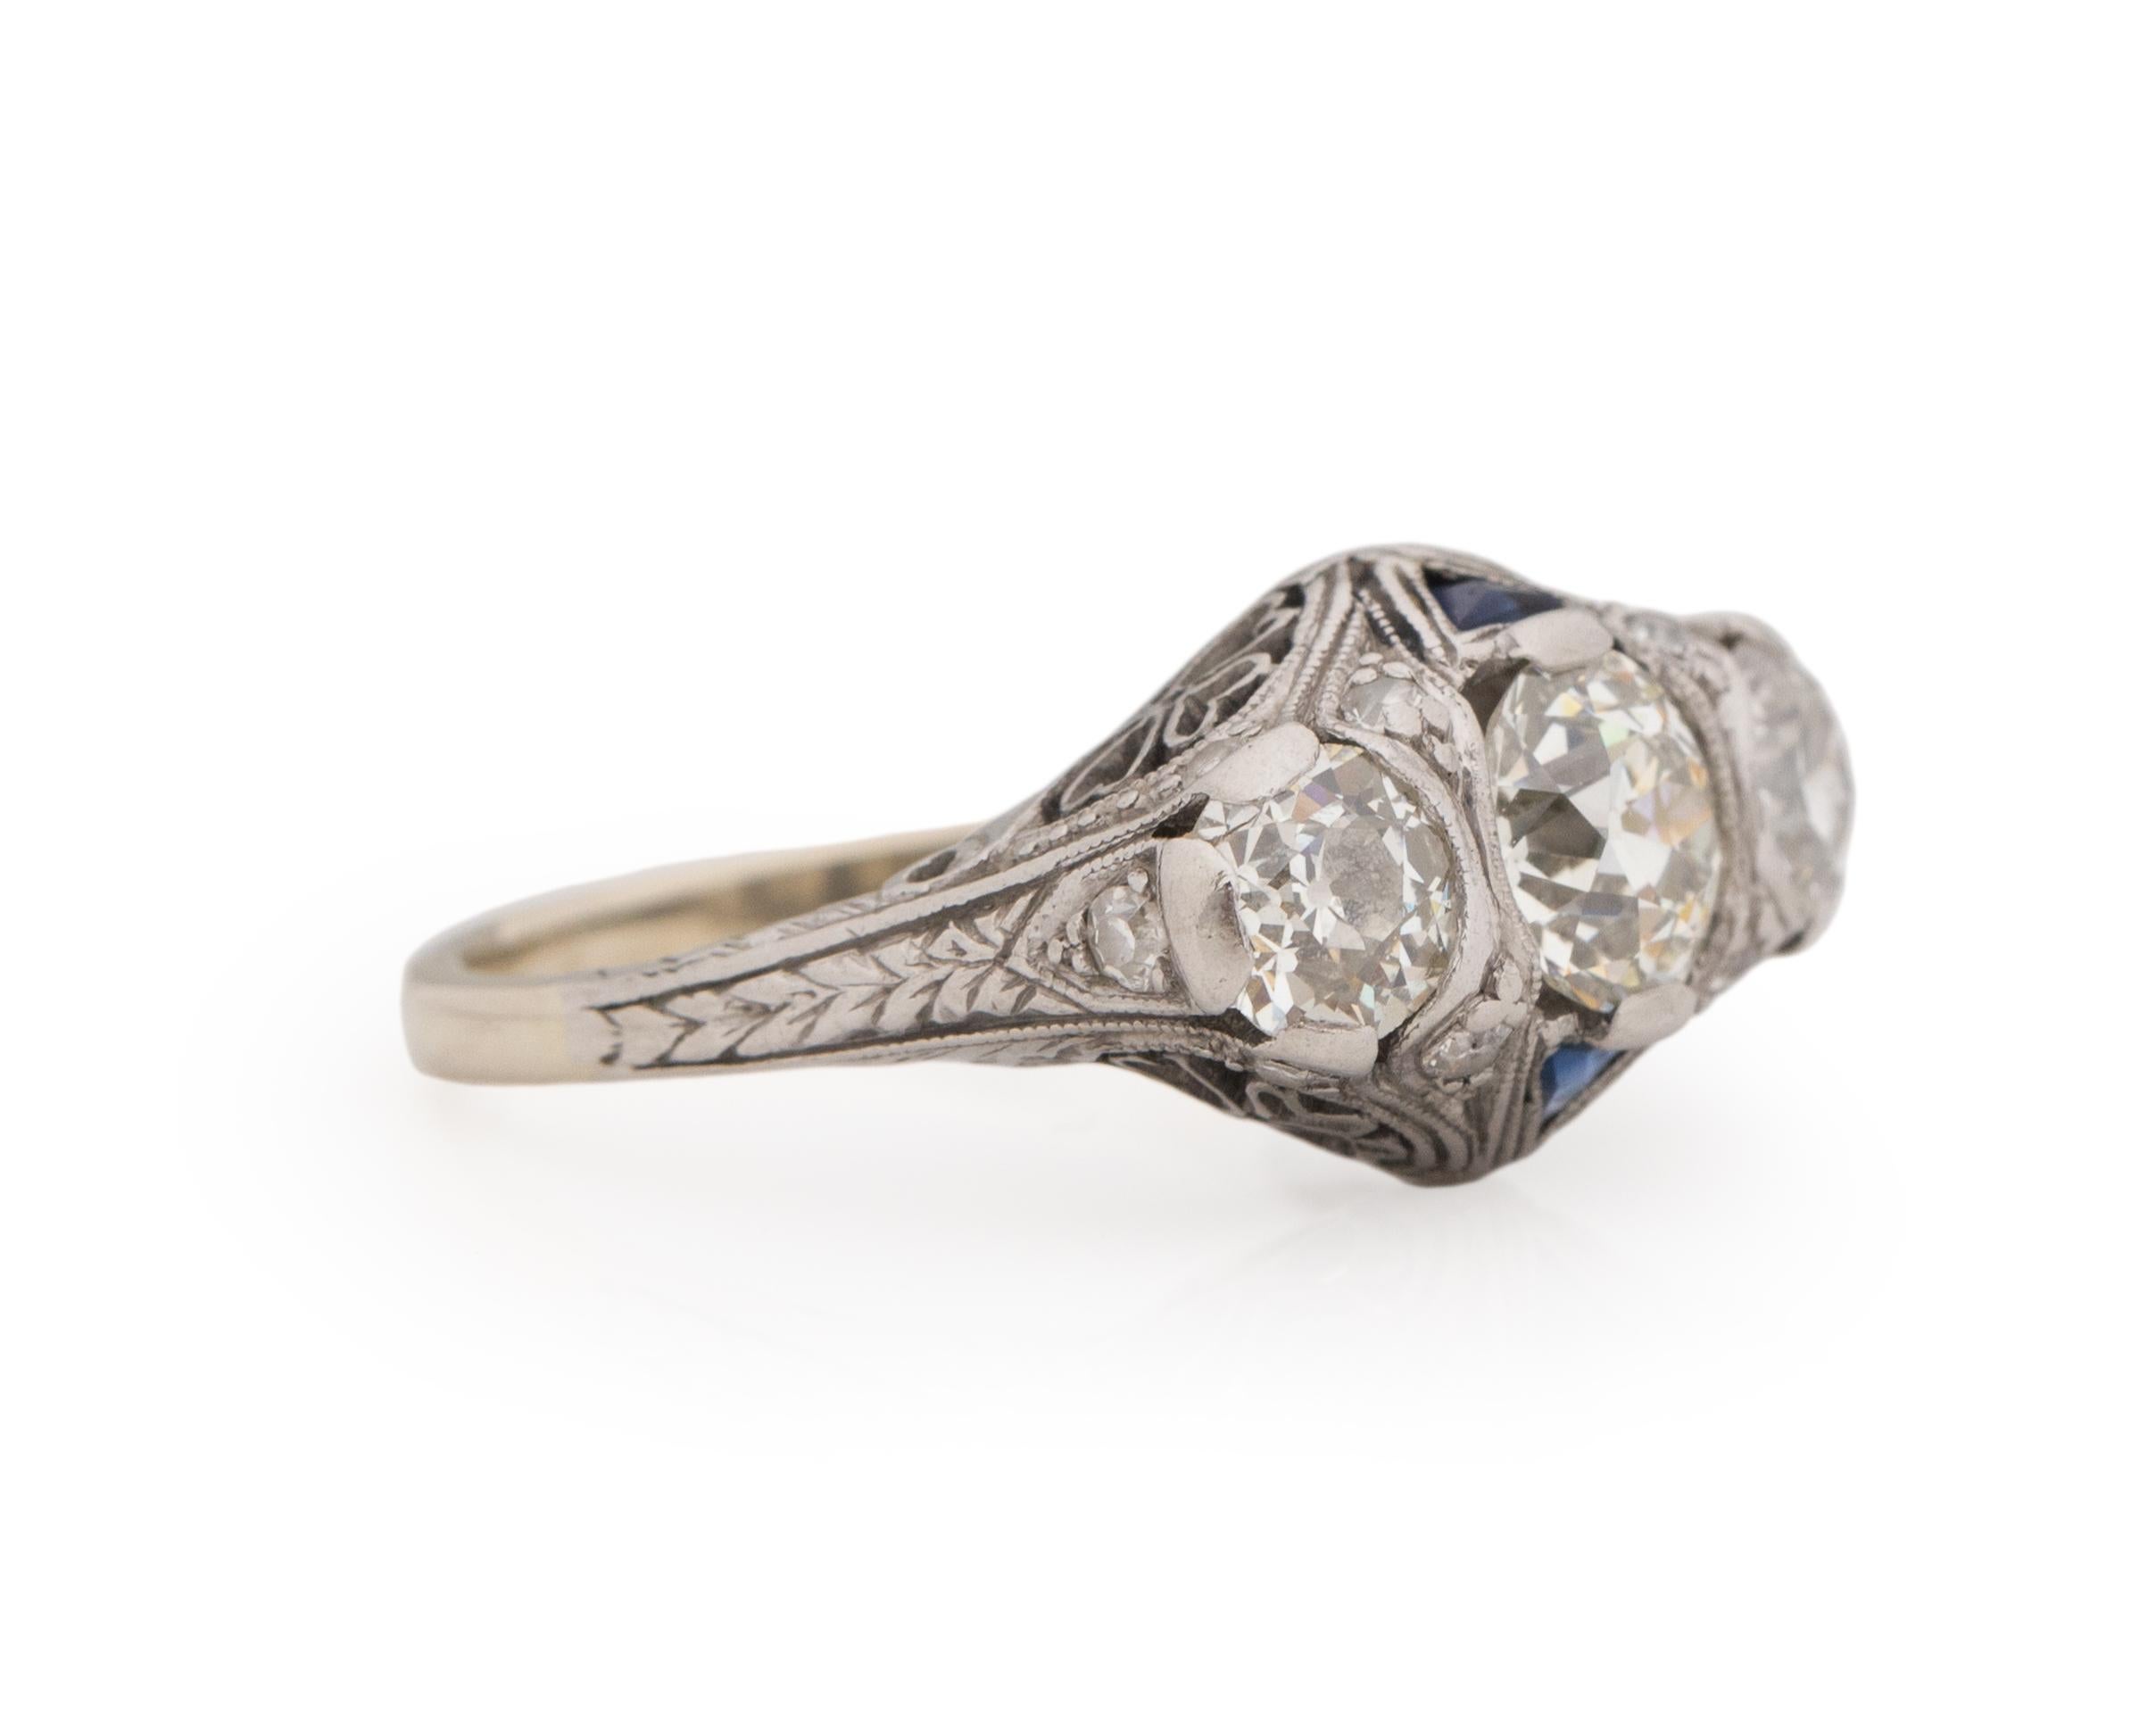 Ring Size: 5.75
Metal Type: Platinum [Hallmarked, and Tested]
Weight: 4.2 grams

Diamond Details:
GIA REPORT #: 2221416553
Weight: .88ct
Cut: Old European brilliant
Color: K
Clarity: VVS2
Measurements: 6.14mm x 5.94mm x 3.85mm

Side Diamond